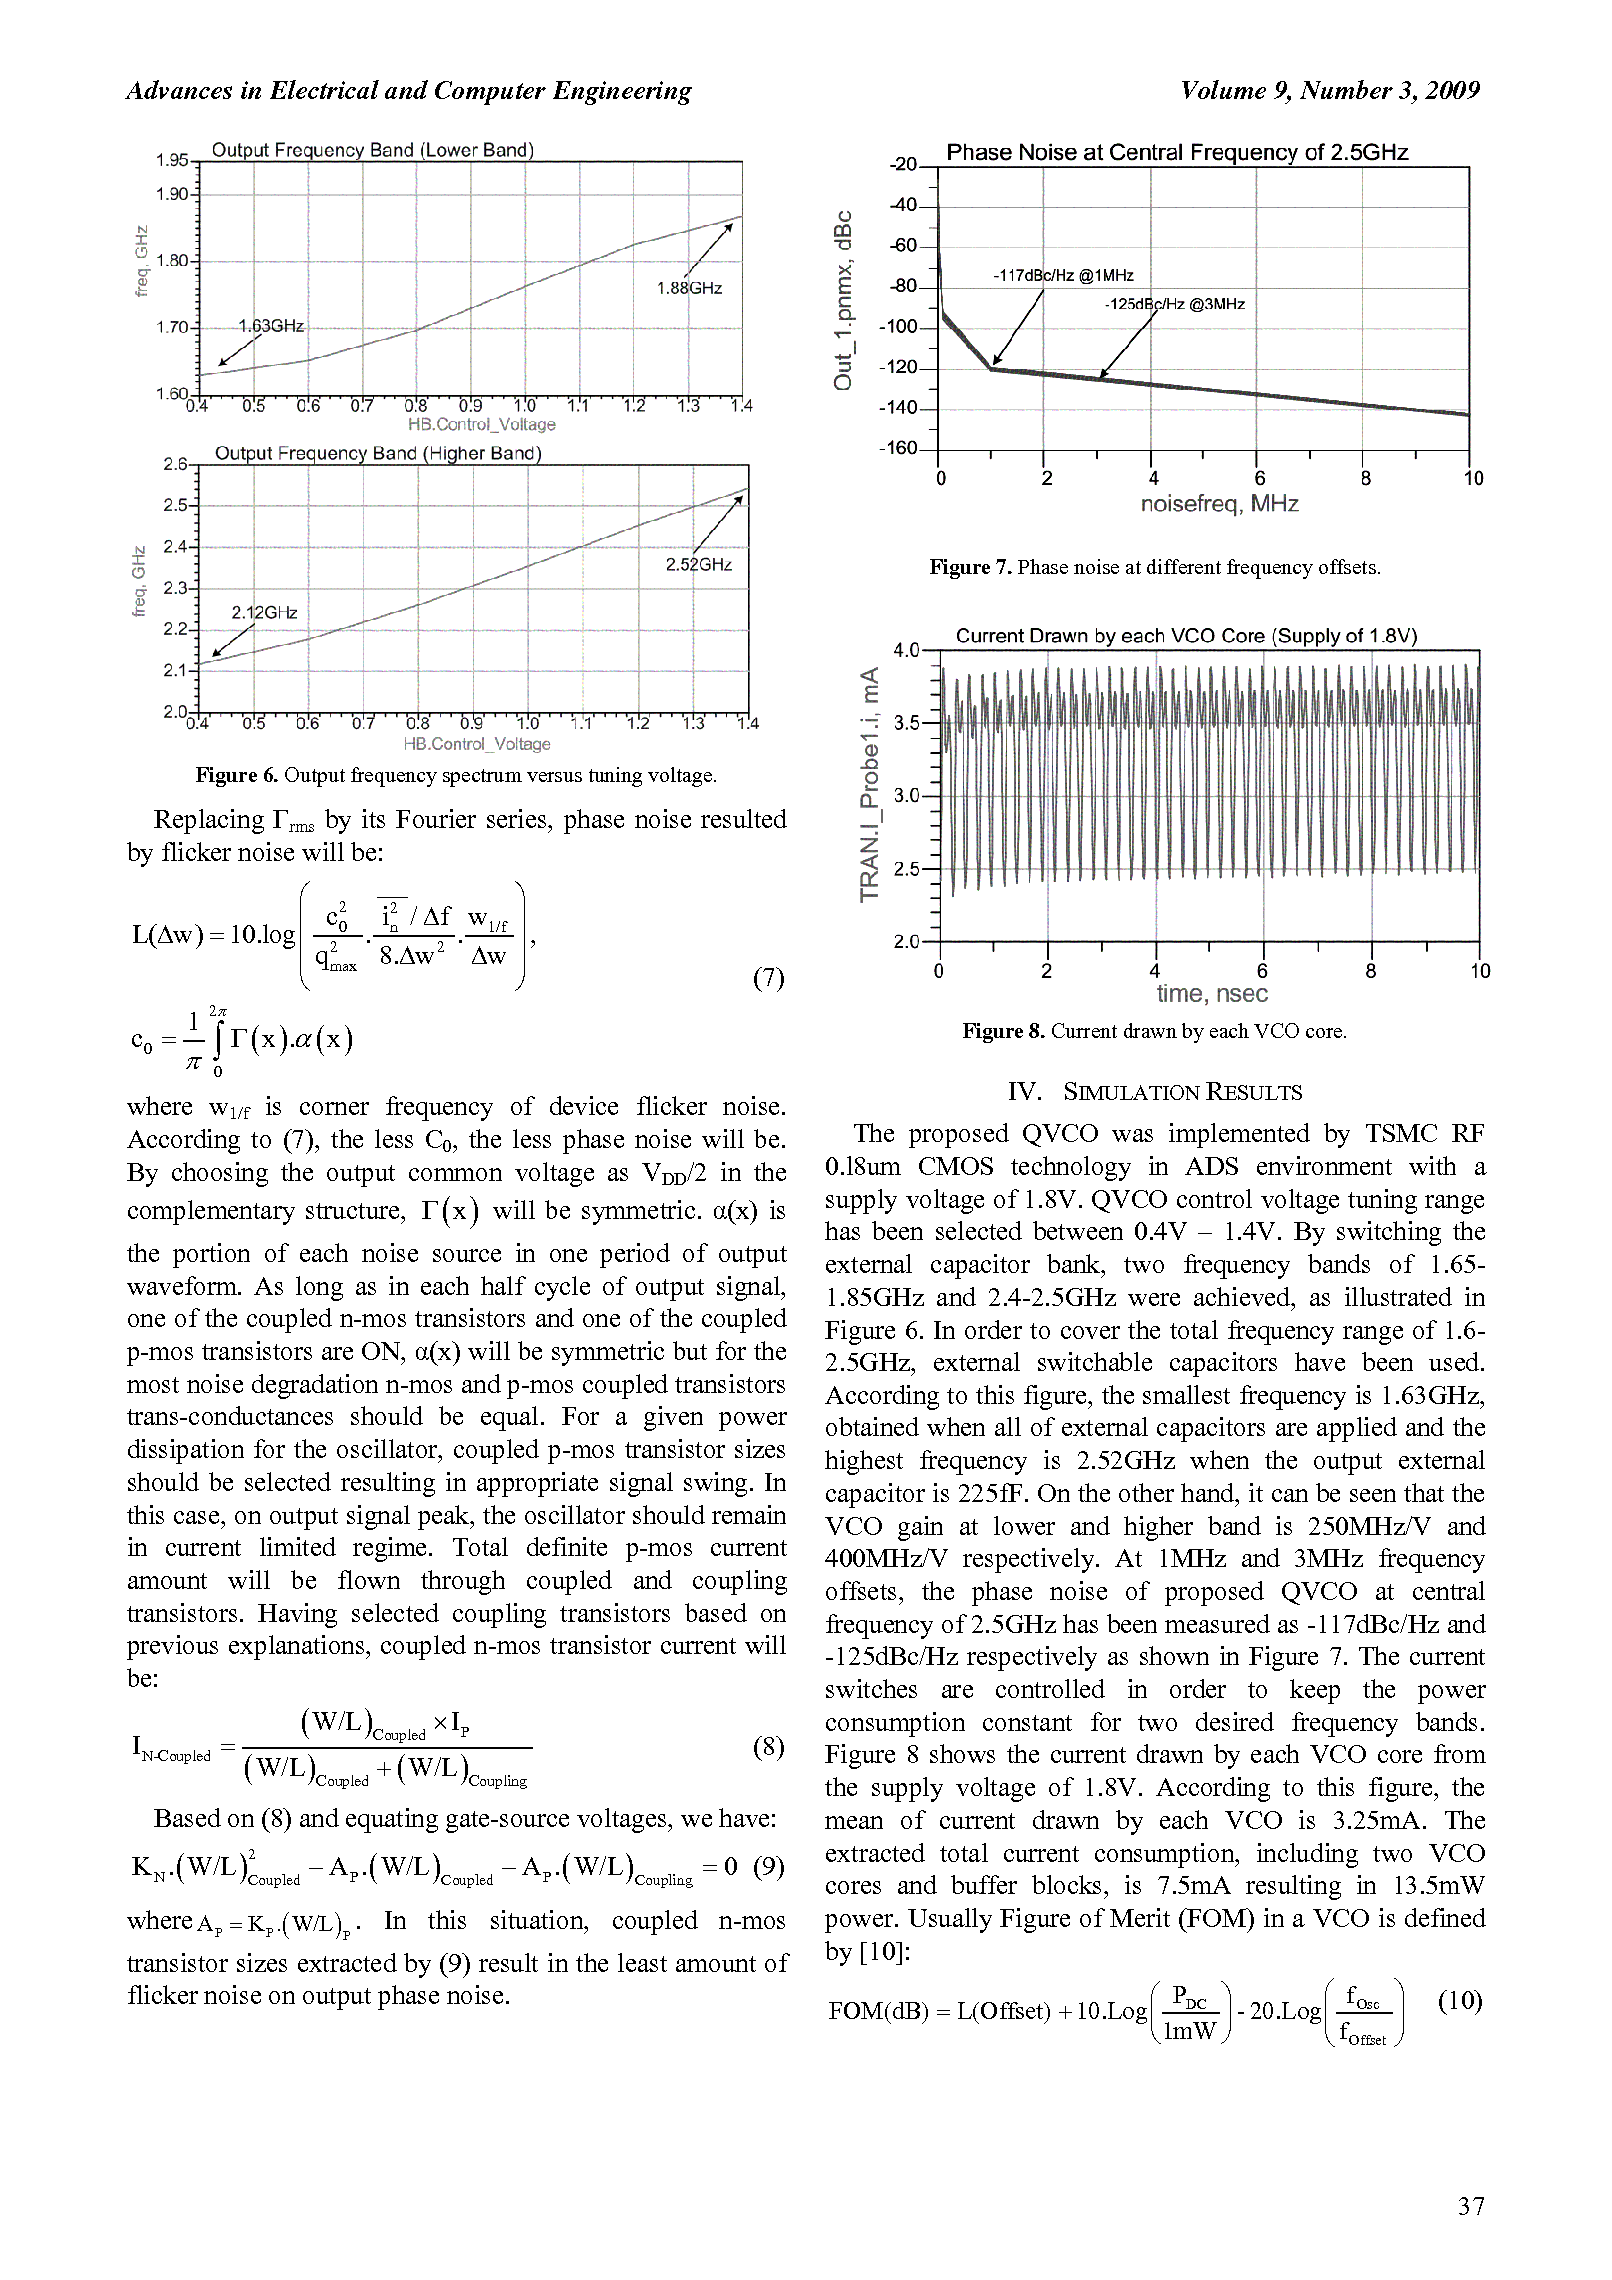 PDF Quickview for paper with DOI:10.4316/AECE.2009.03007